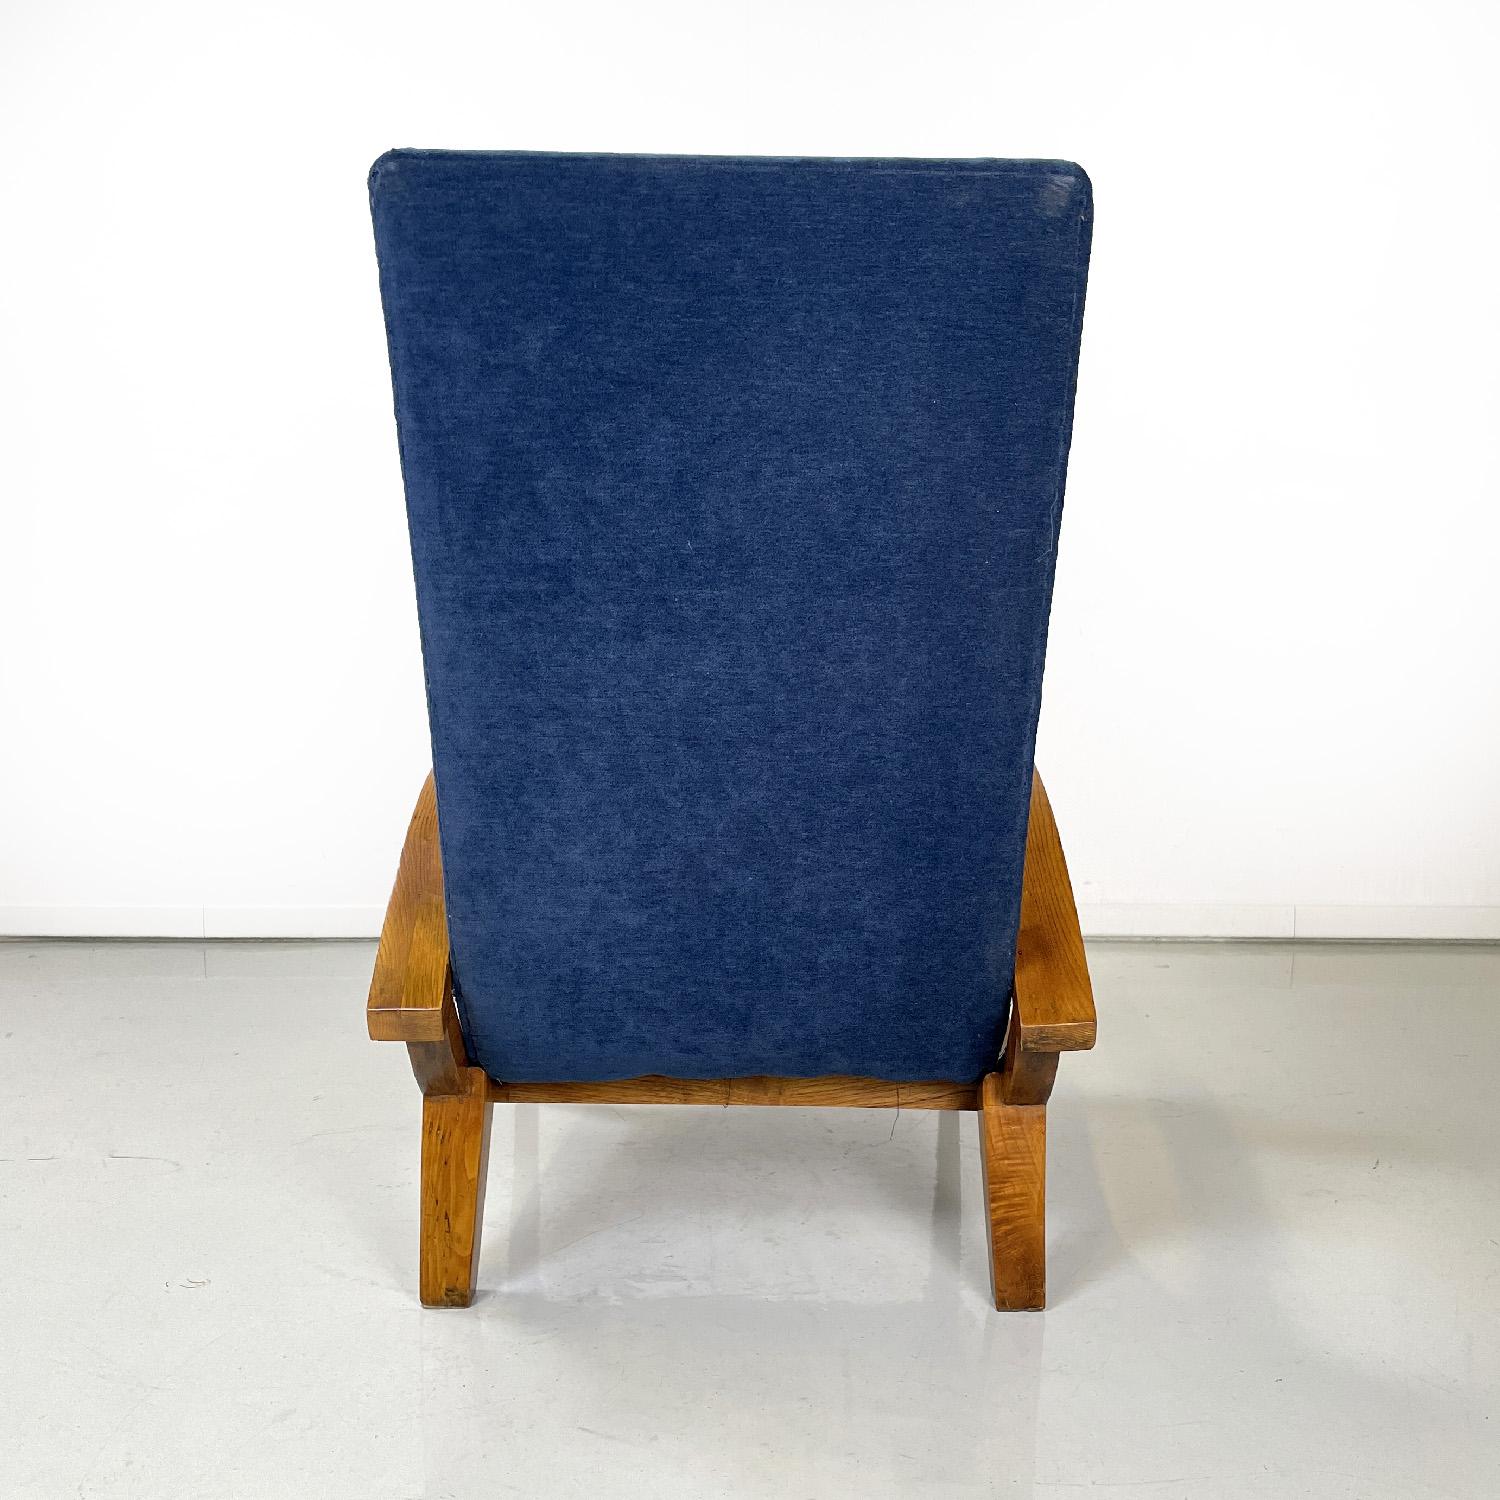 Mid-20th Century Italian mid-century modern wood and blue fabric armchairs, 1950s For Sale